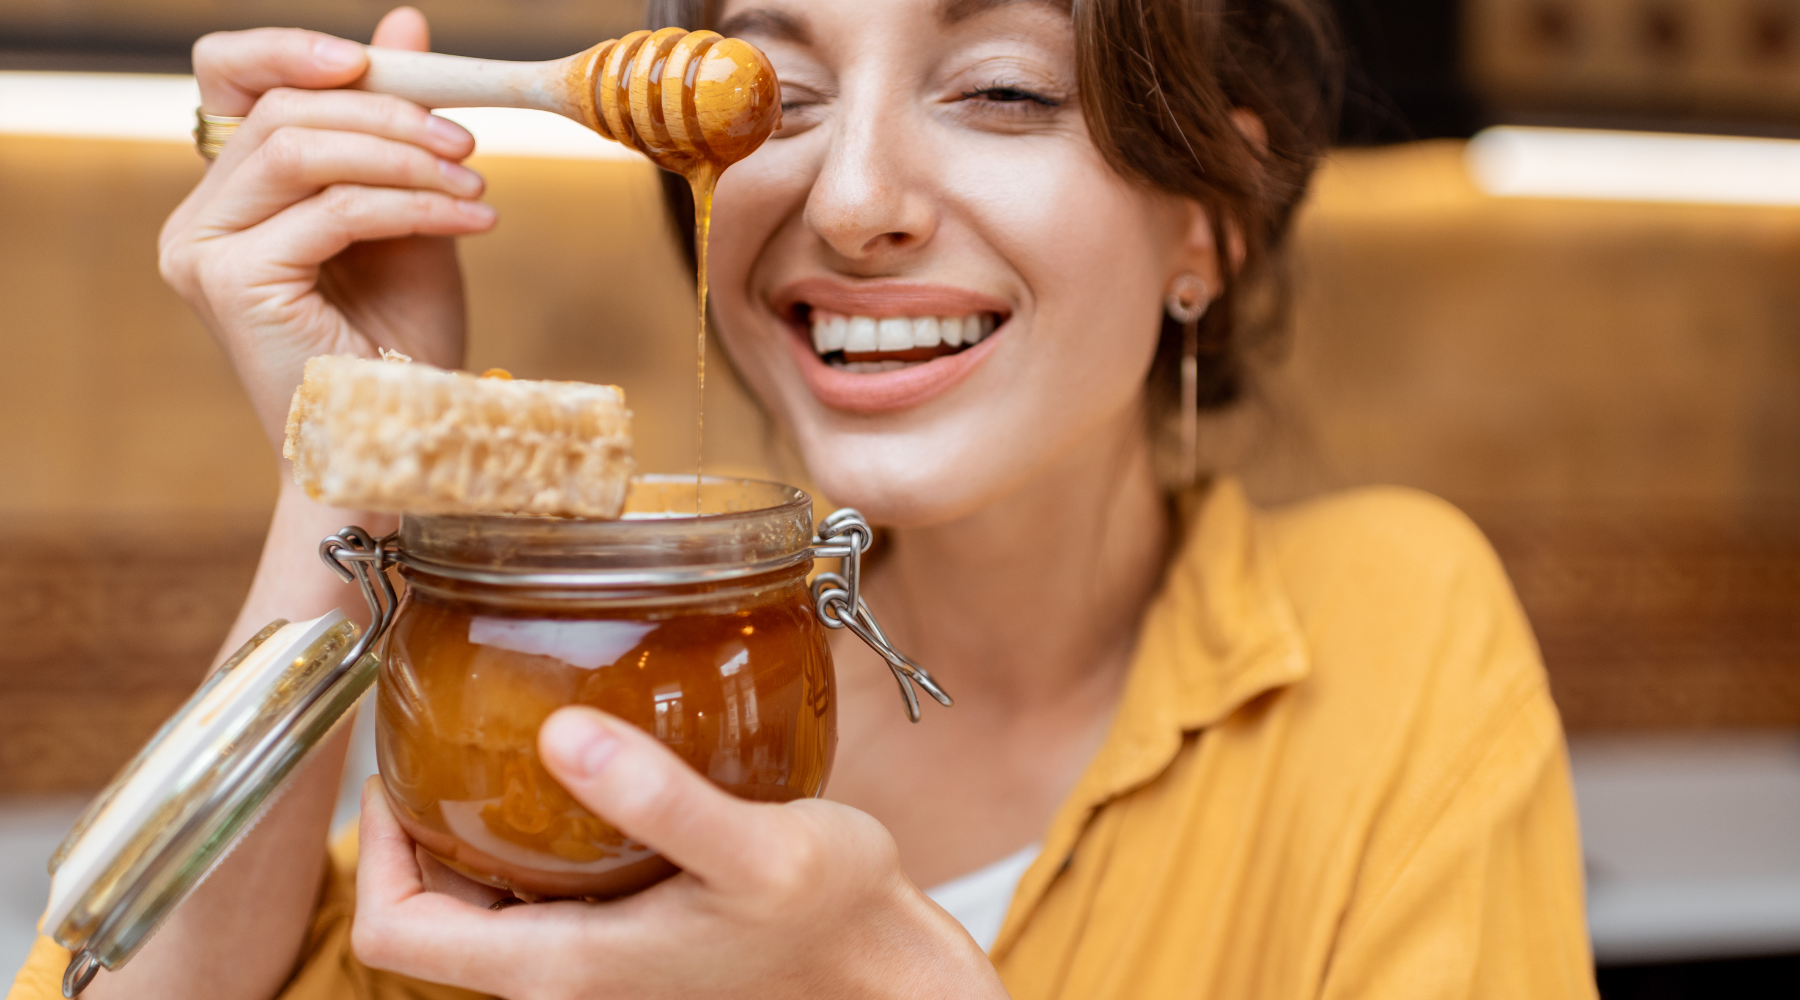 HOW TO CHOOSE THE BEST TYPES OF HONEY